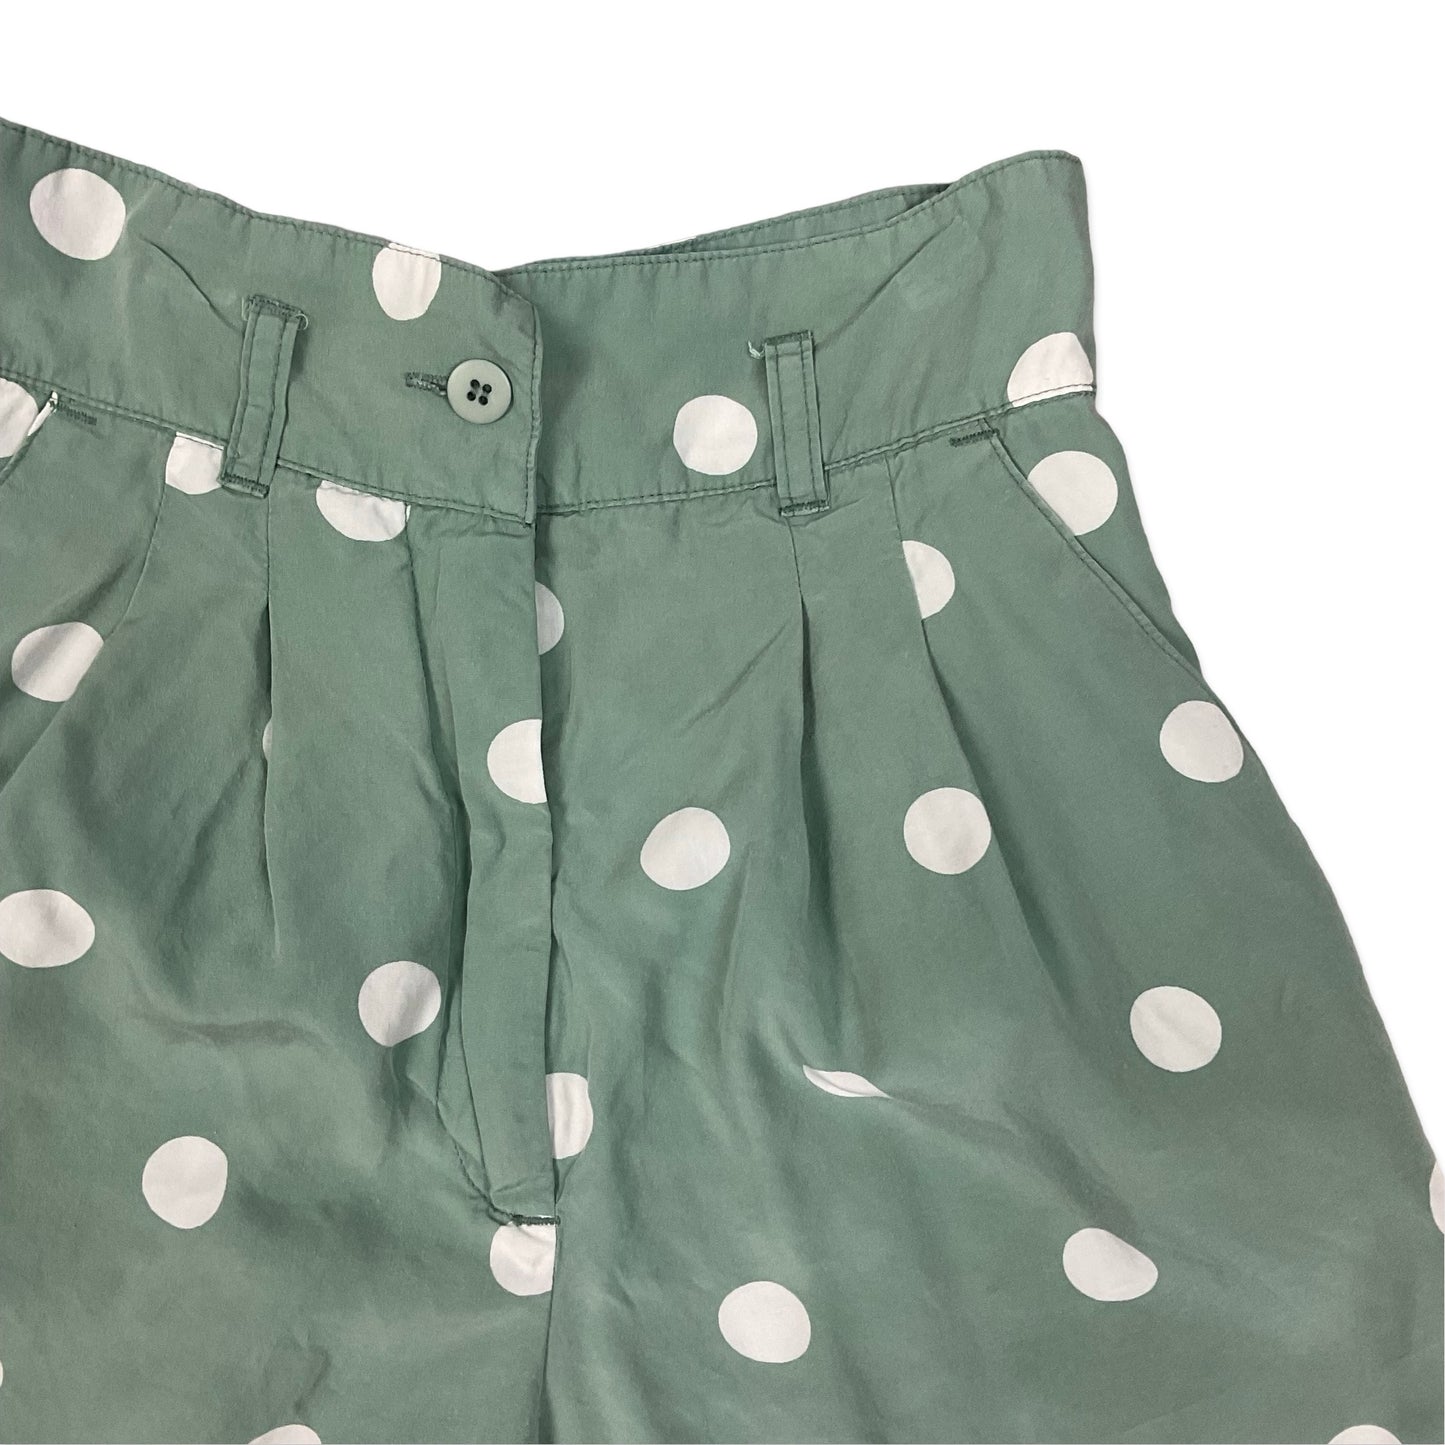 Vintage Green & White Polka Dot High Waisted Pleated Shorts 6